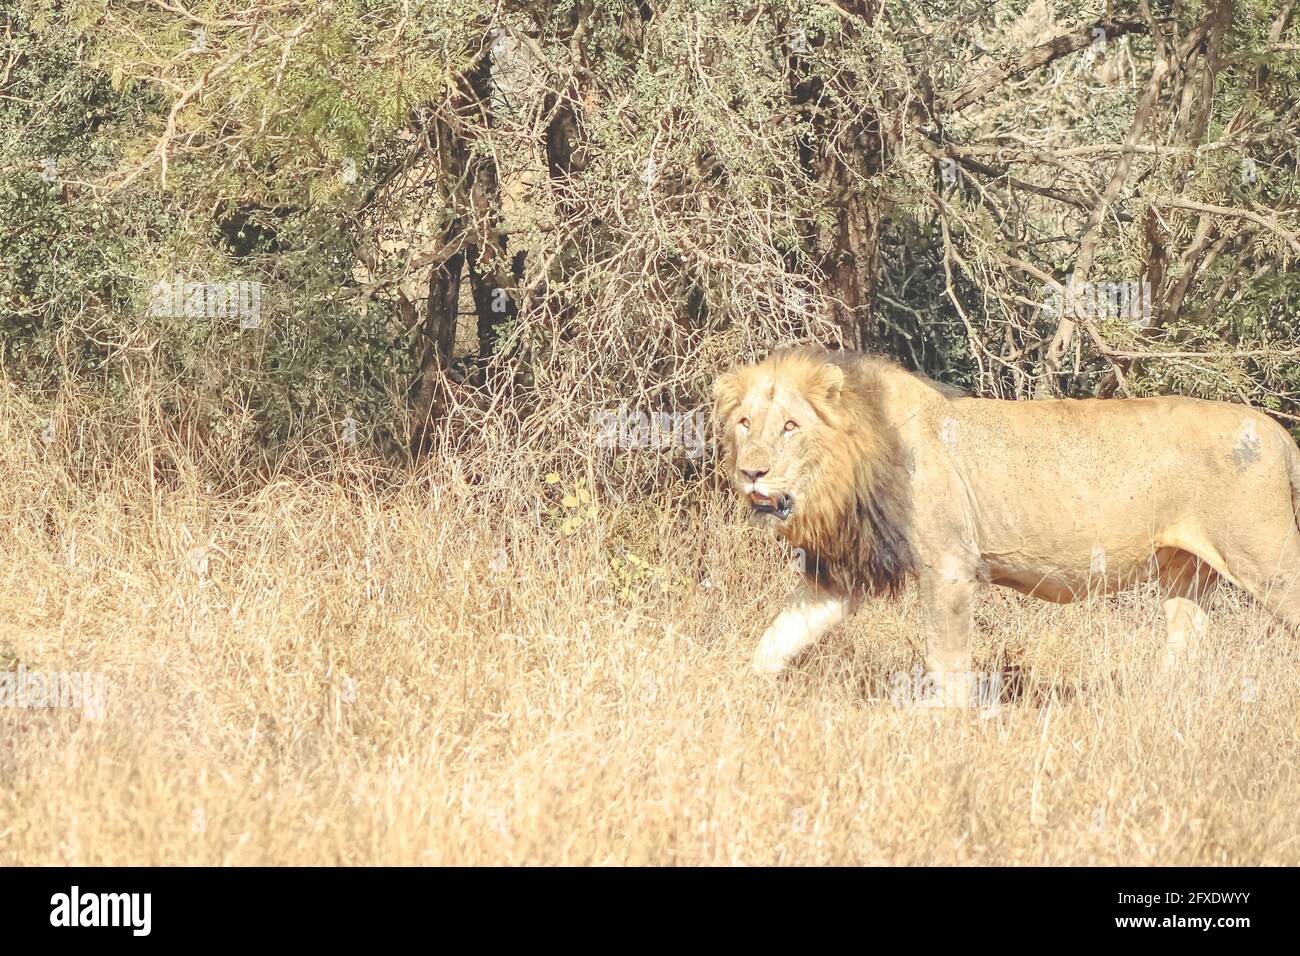 Seeking the 'King of The Jungle,' all day while on my African Safari. All of the sudden there he was. Presence of royalty, prestige, and status. Stock Photo